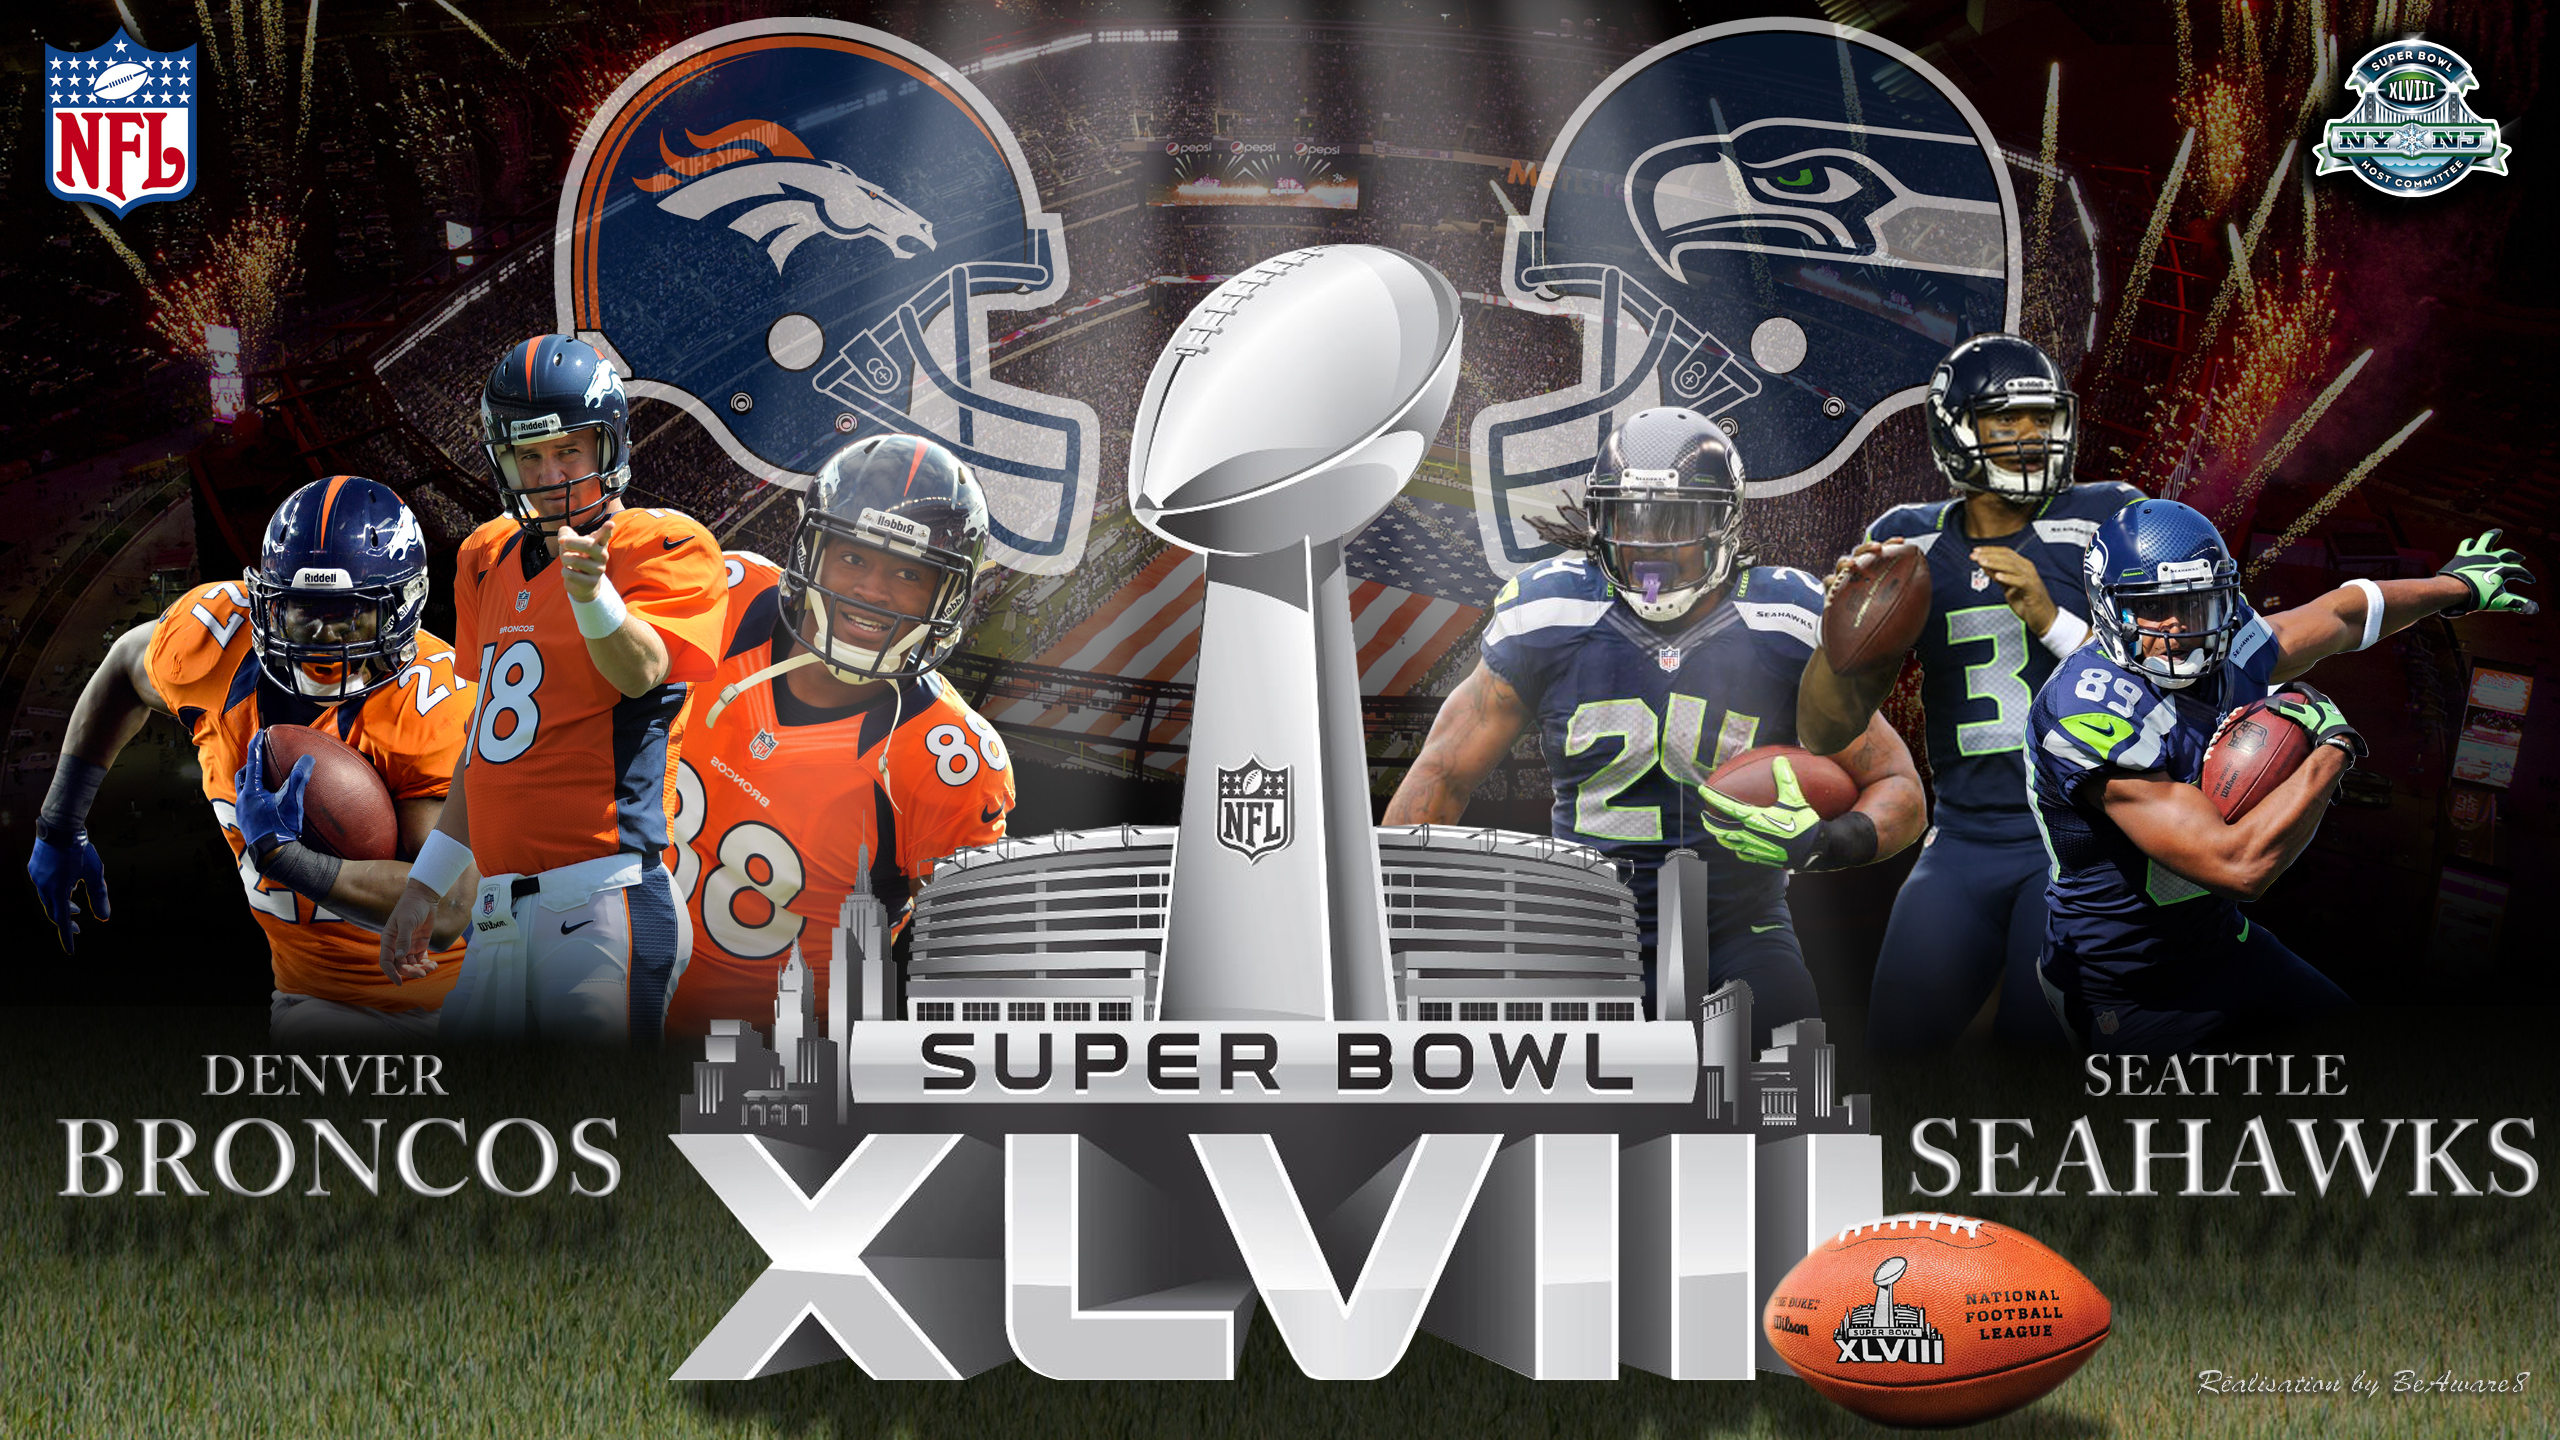 Super Bowl XLVIII Denver Broncos Vs Seattle Seahaw by BeAware8 on 2560x1440